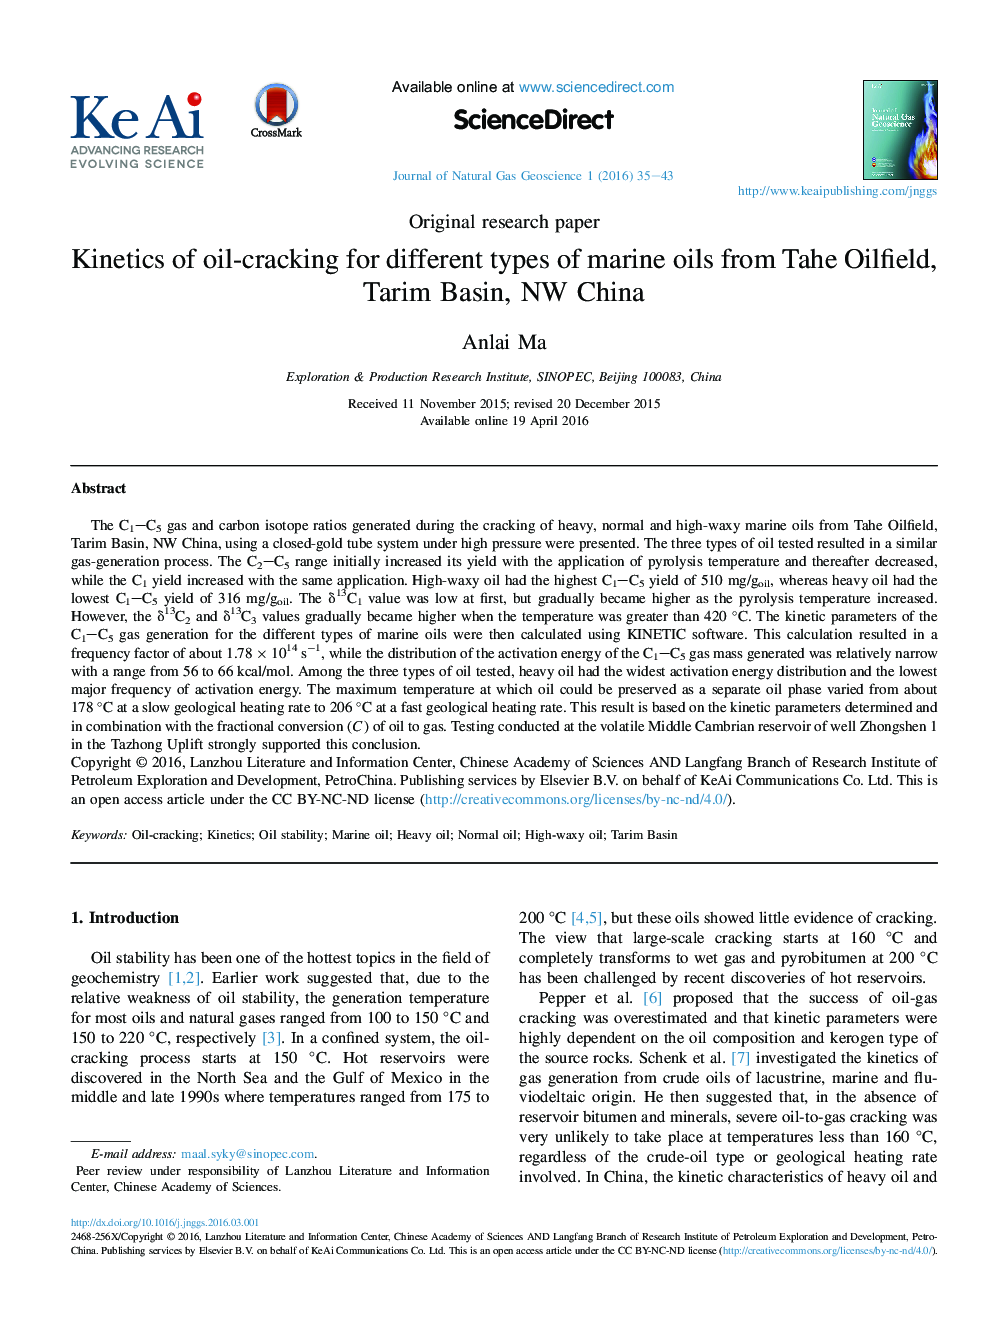 Kinetics of oil-cracking for different types of marine oils from Tahe Oilfield, Tarim Basin, NW China 